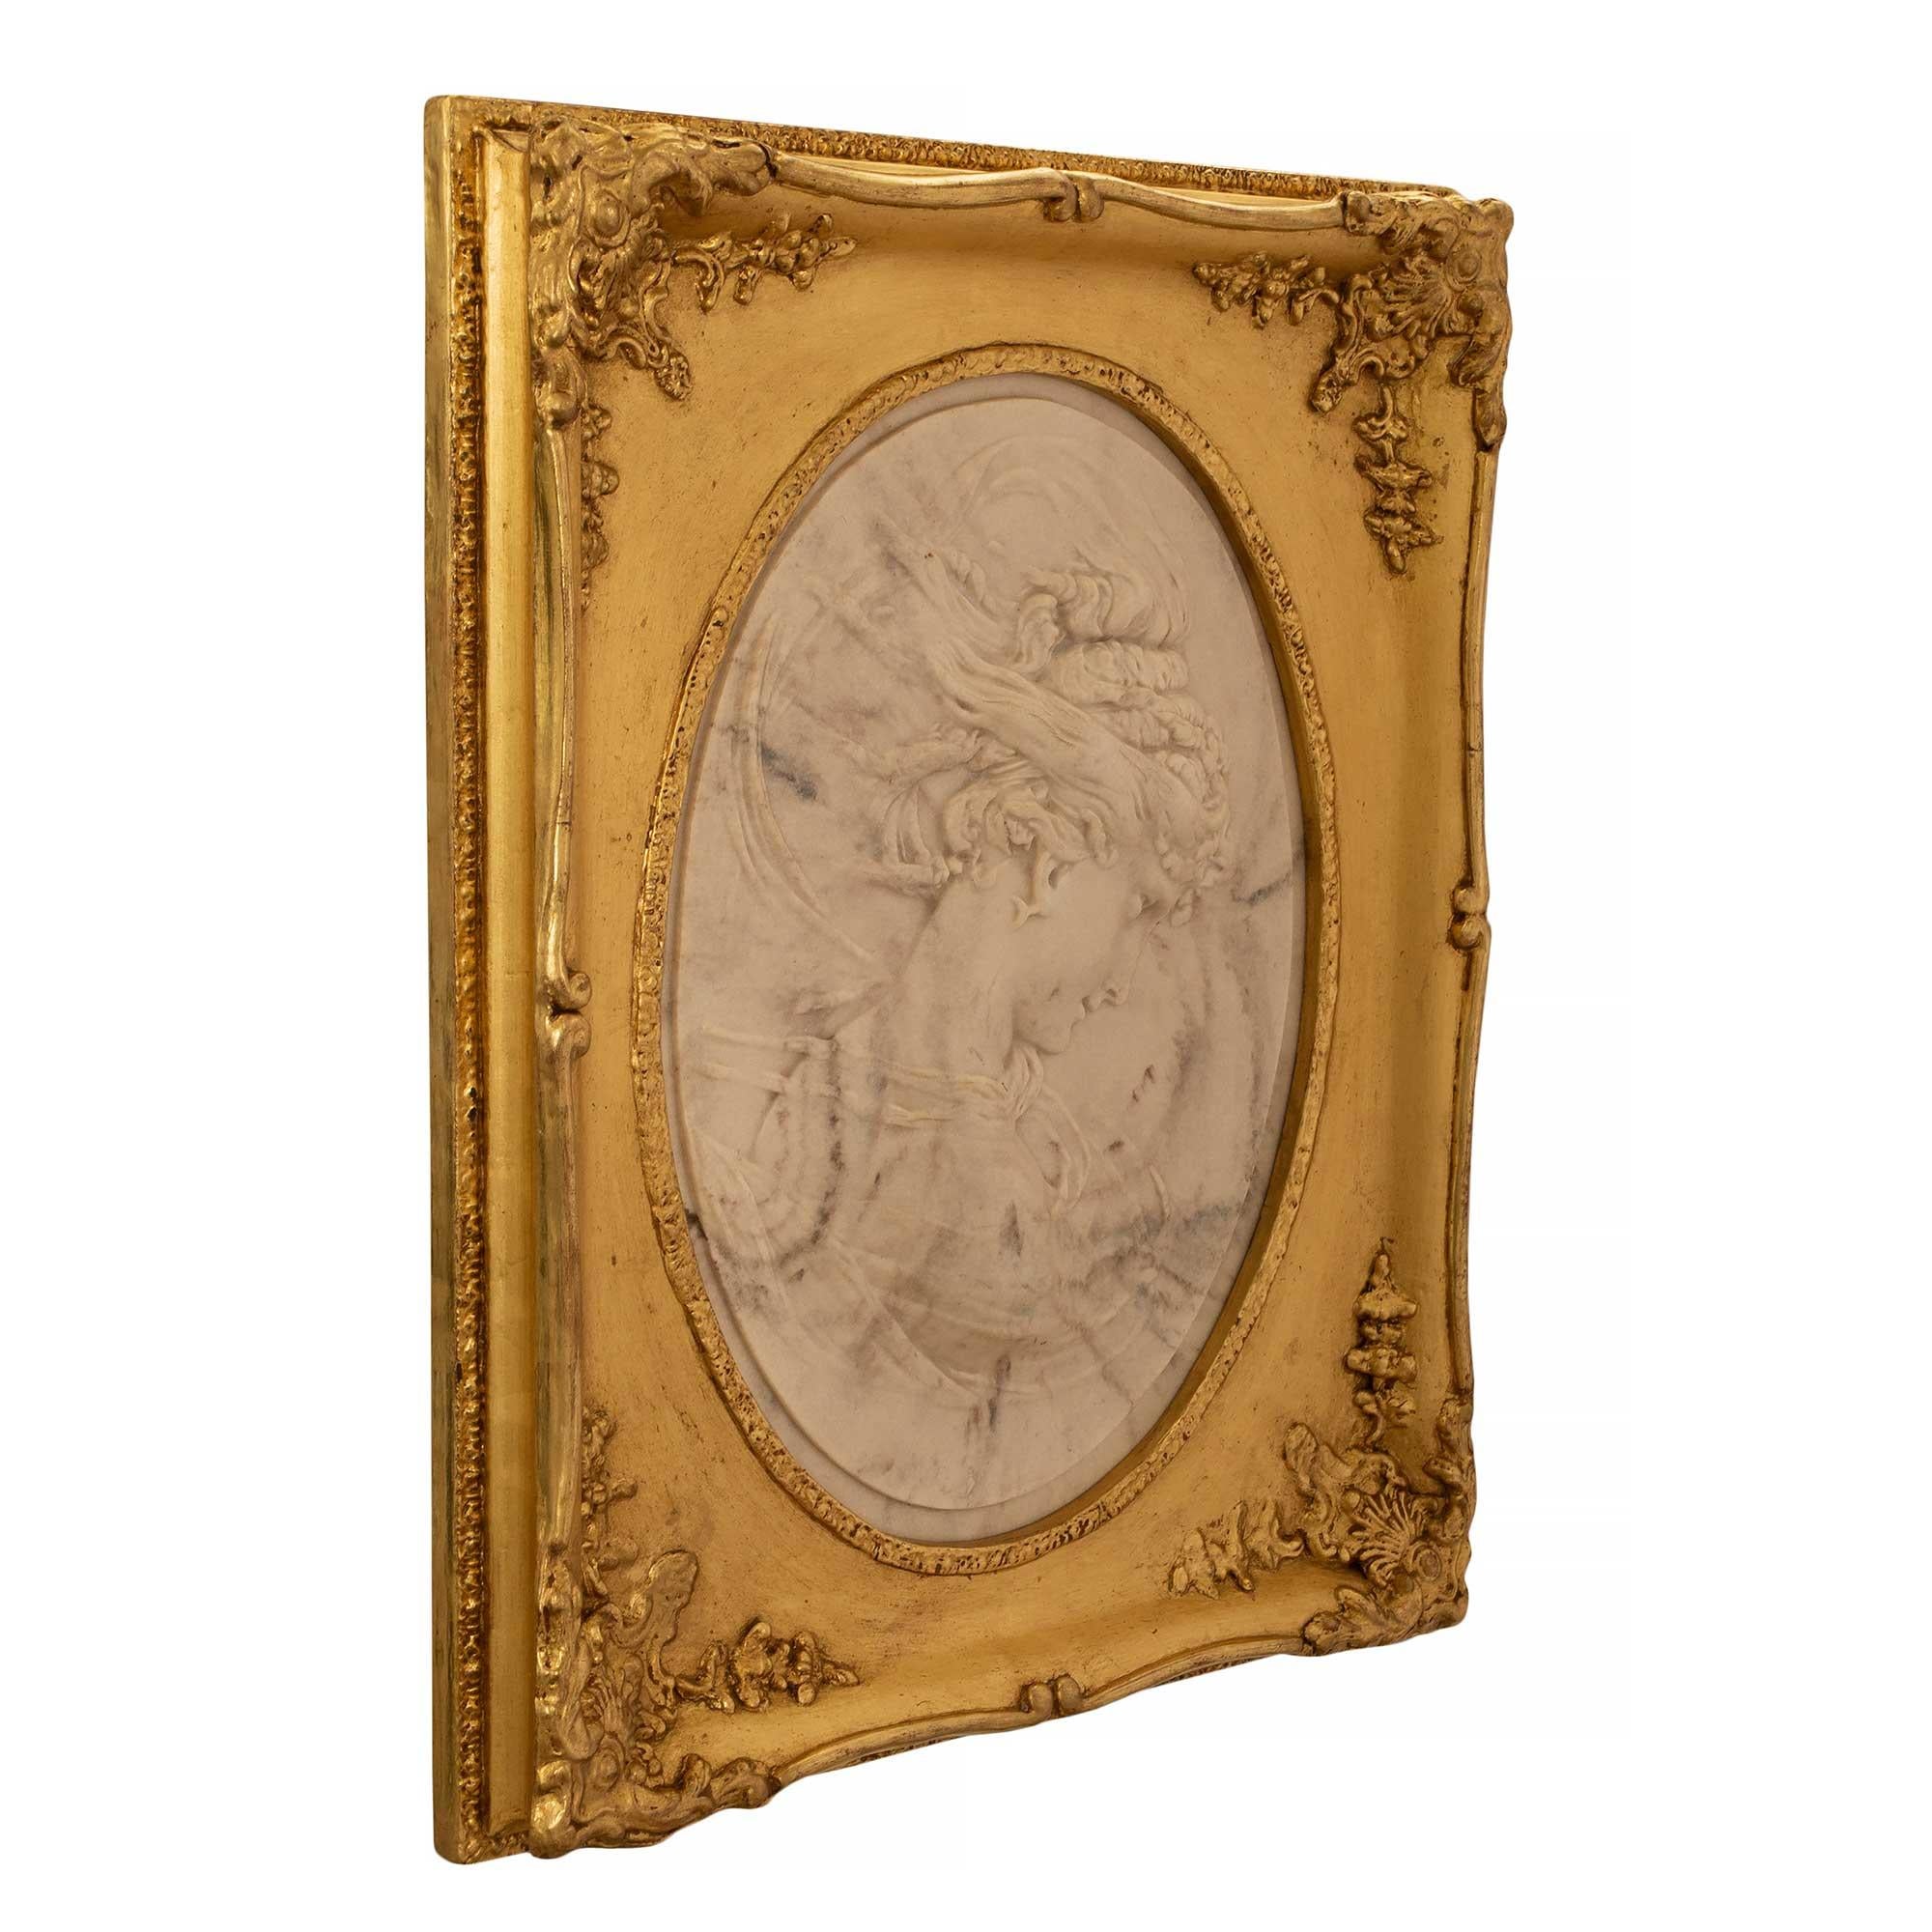 A stunning Italian 19th century white Carrara marble finely carved oval relief in a beautiful giltwood frame. The wonderfully executed white Carrara marble relief is of an ethereal classical maiden with her hair in a period updo. The marble relief